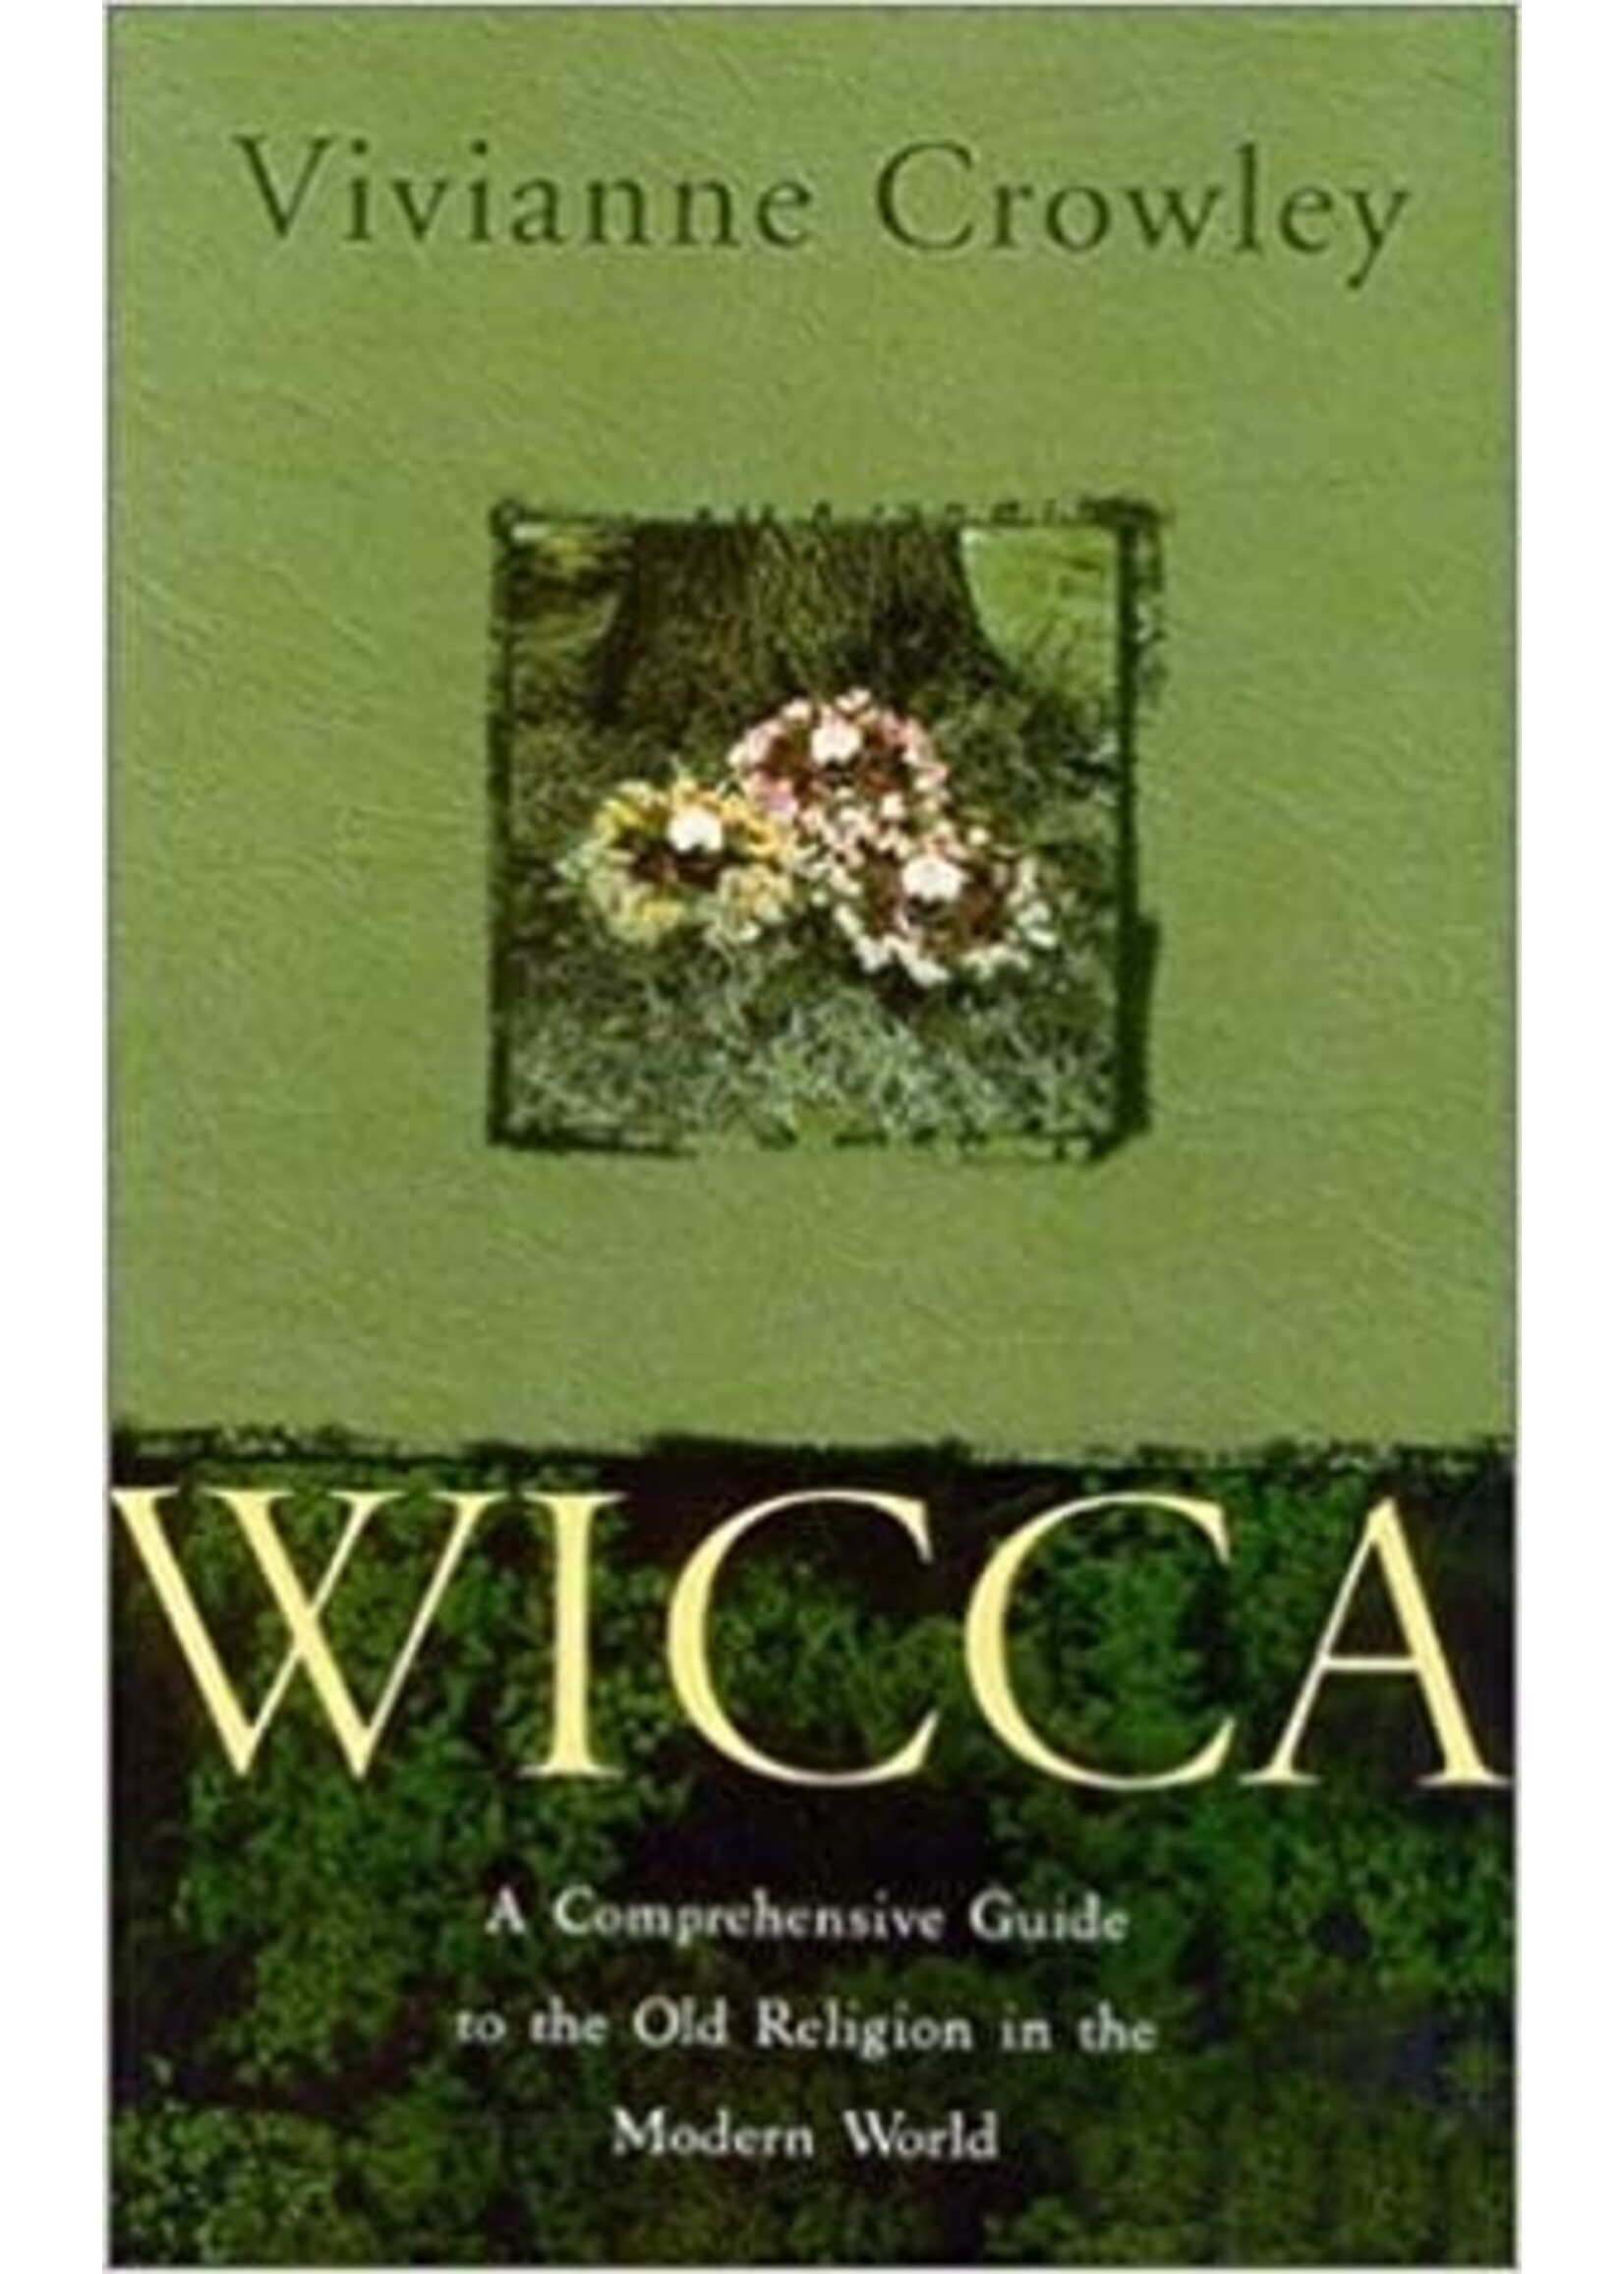 Wicca A Comprehensive Guide to the Old Religion in the Modern World by Vivianne Crowley 2003 ed.